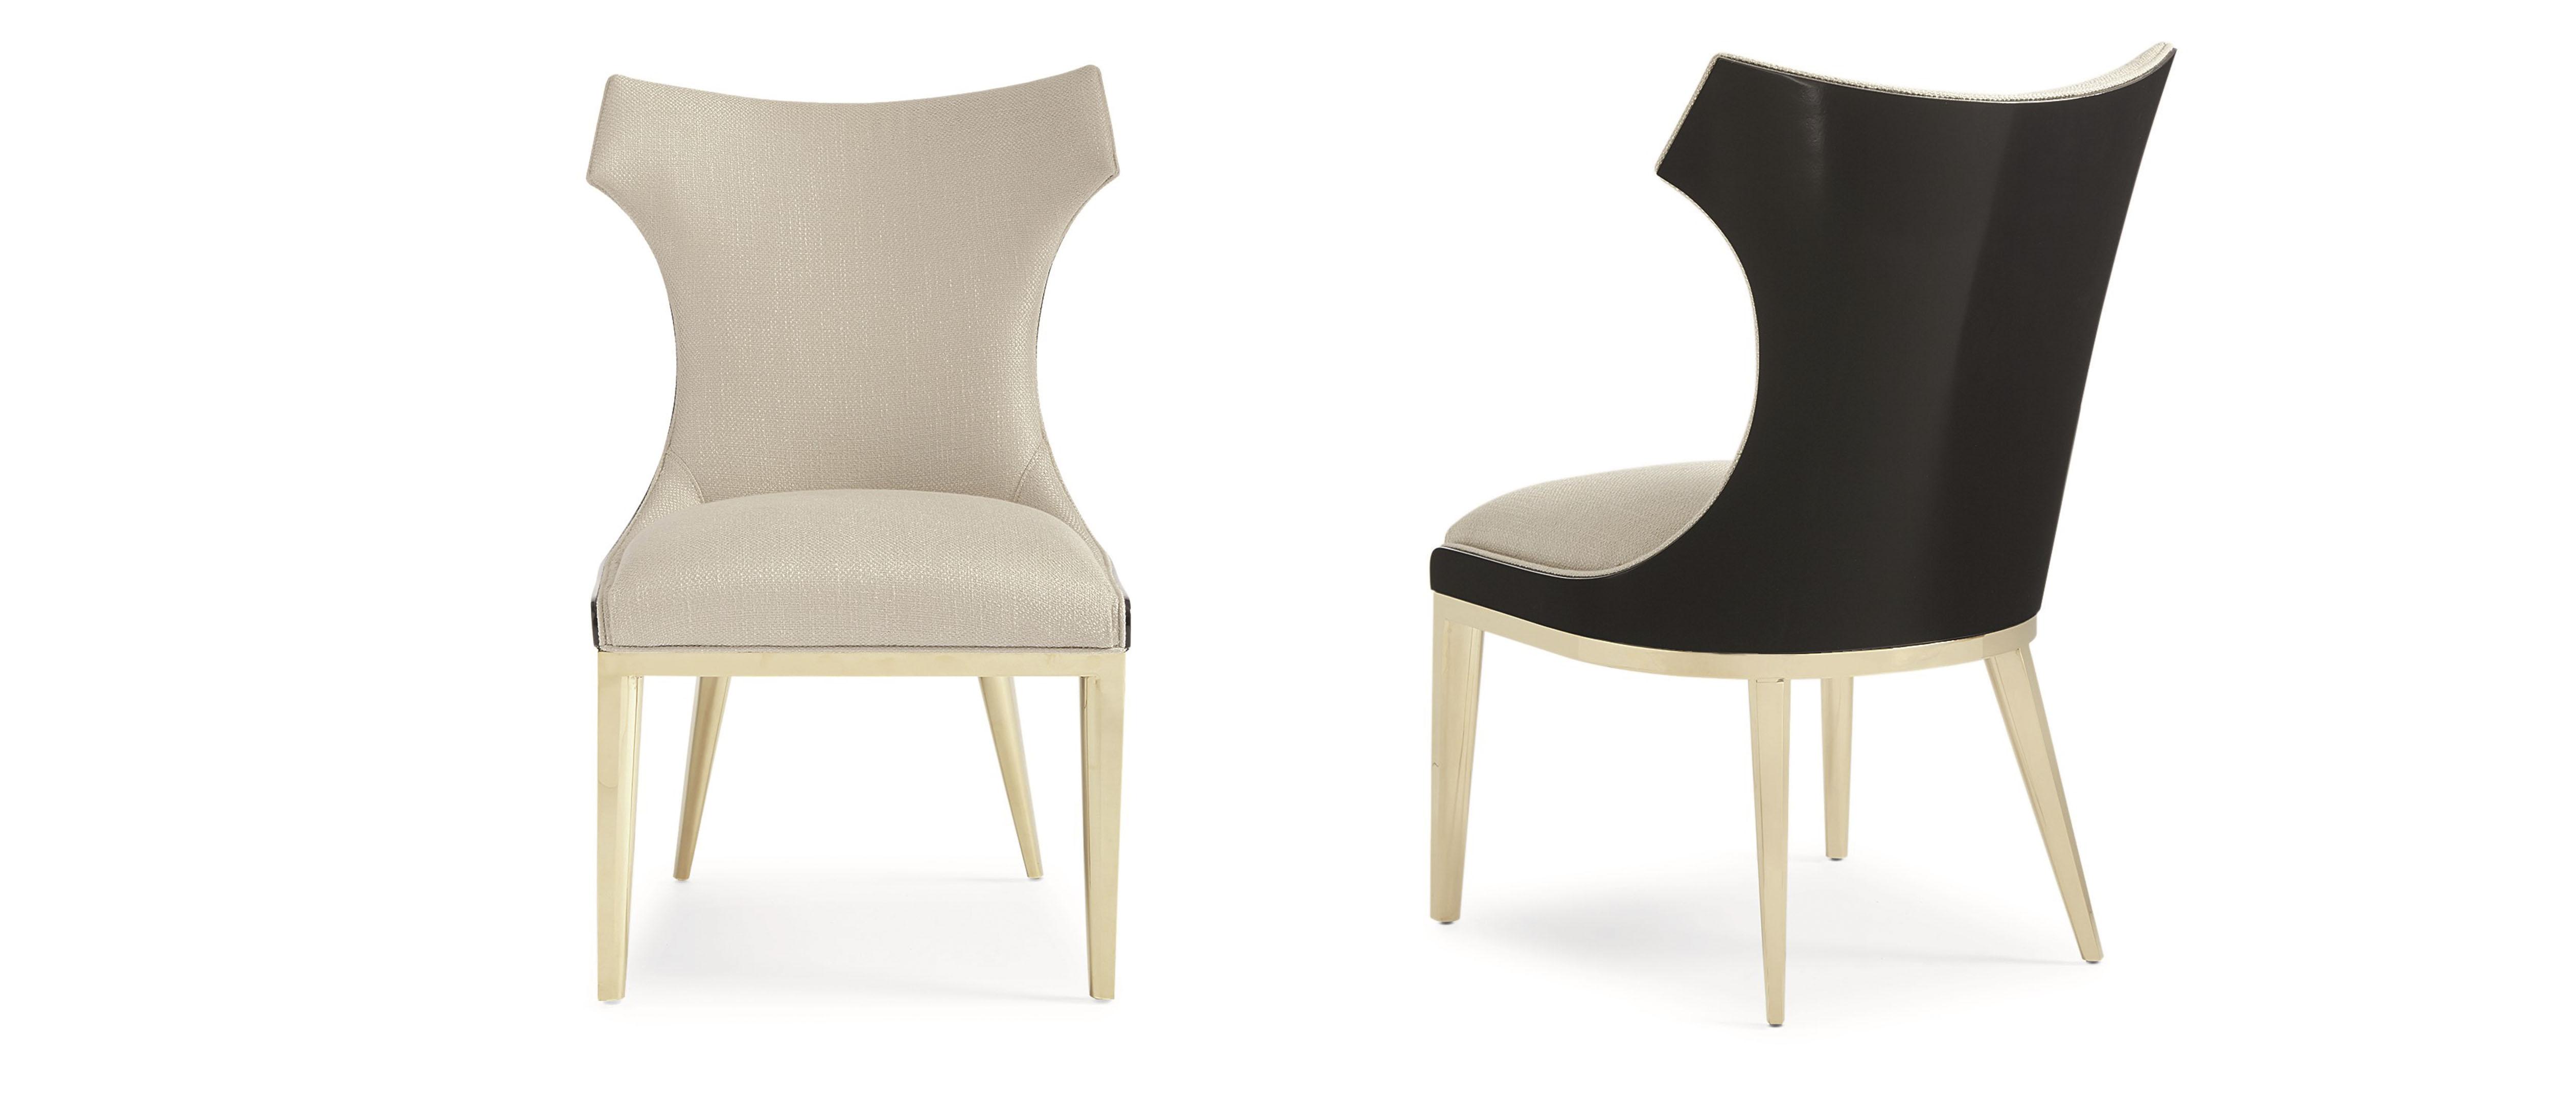 Modern Dining Chair Set THE URBANE DINING SIDE CHAIR SIG-017-281-Set-2 in Ivory, Gold Fabric